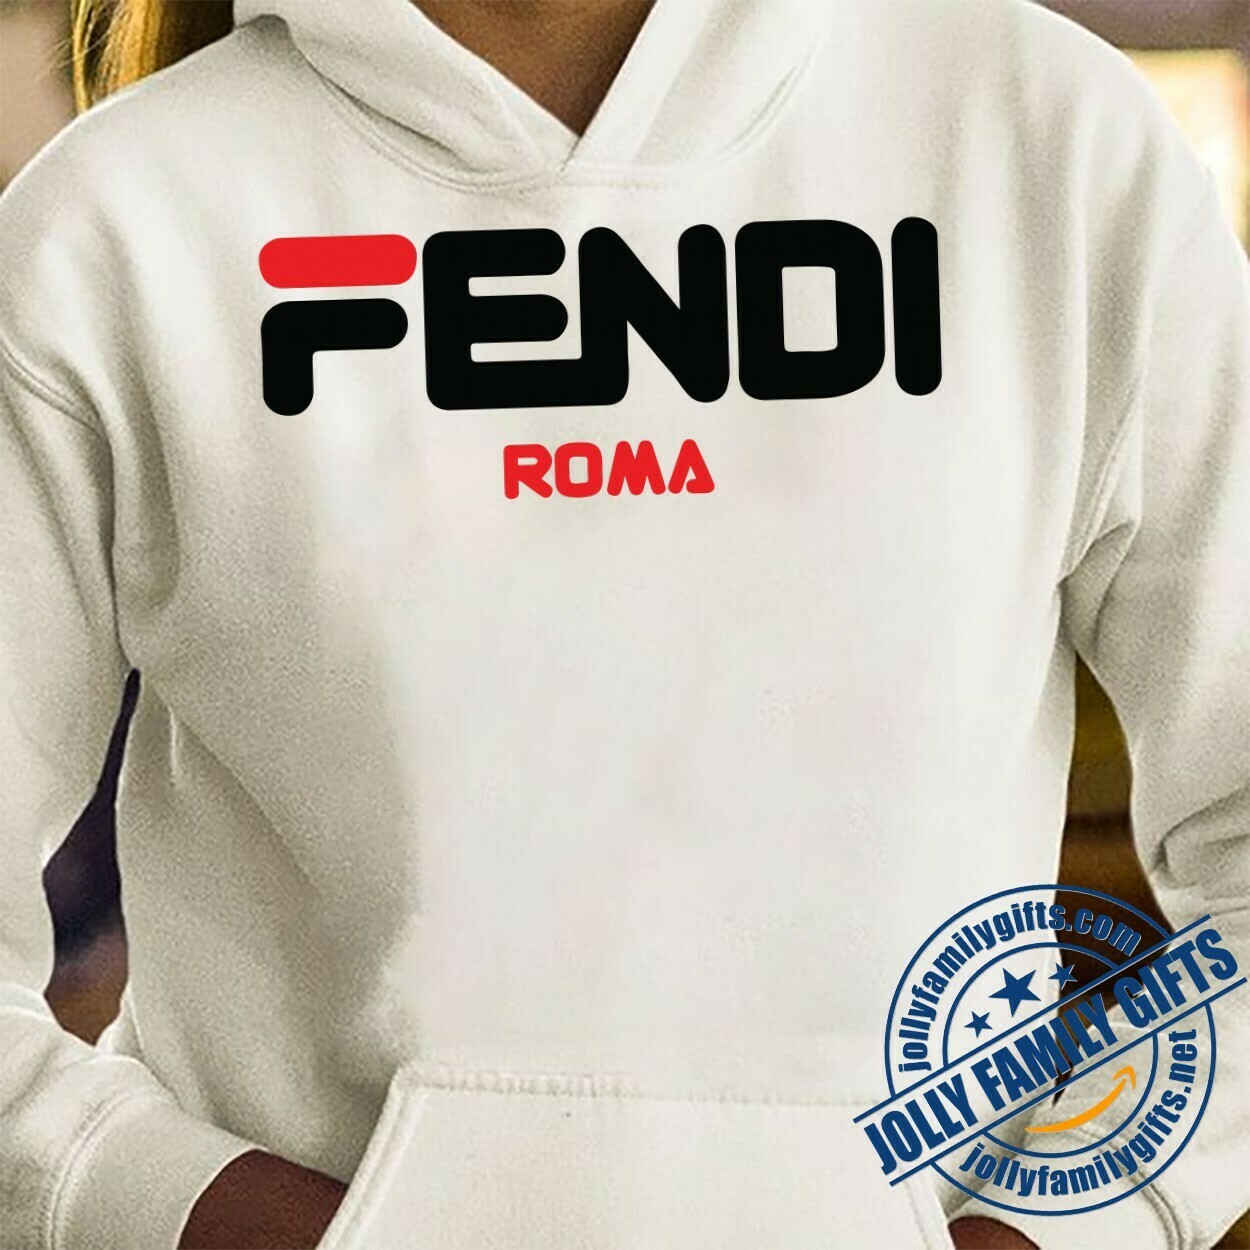 fendi shirt with colorful letters